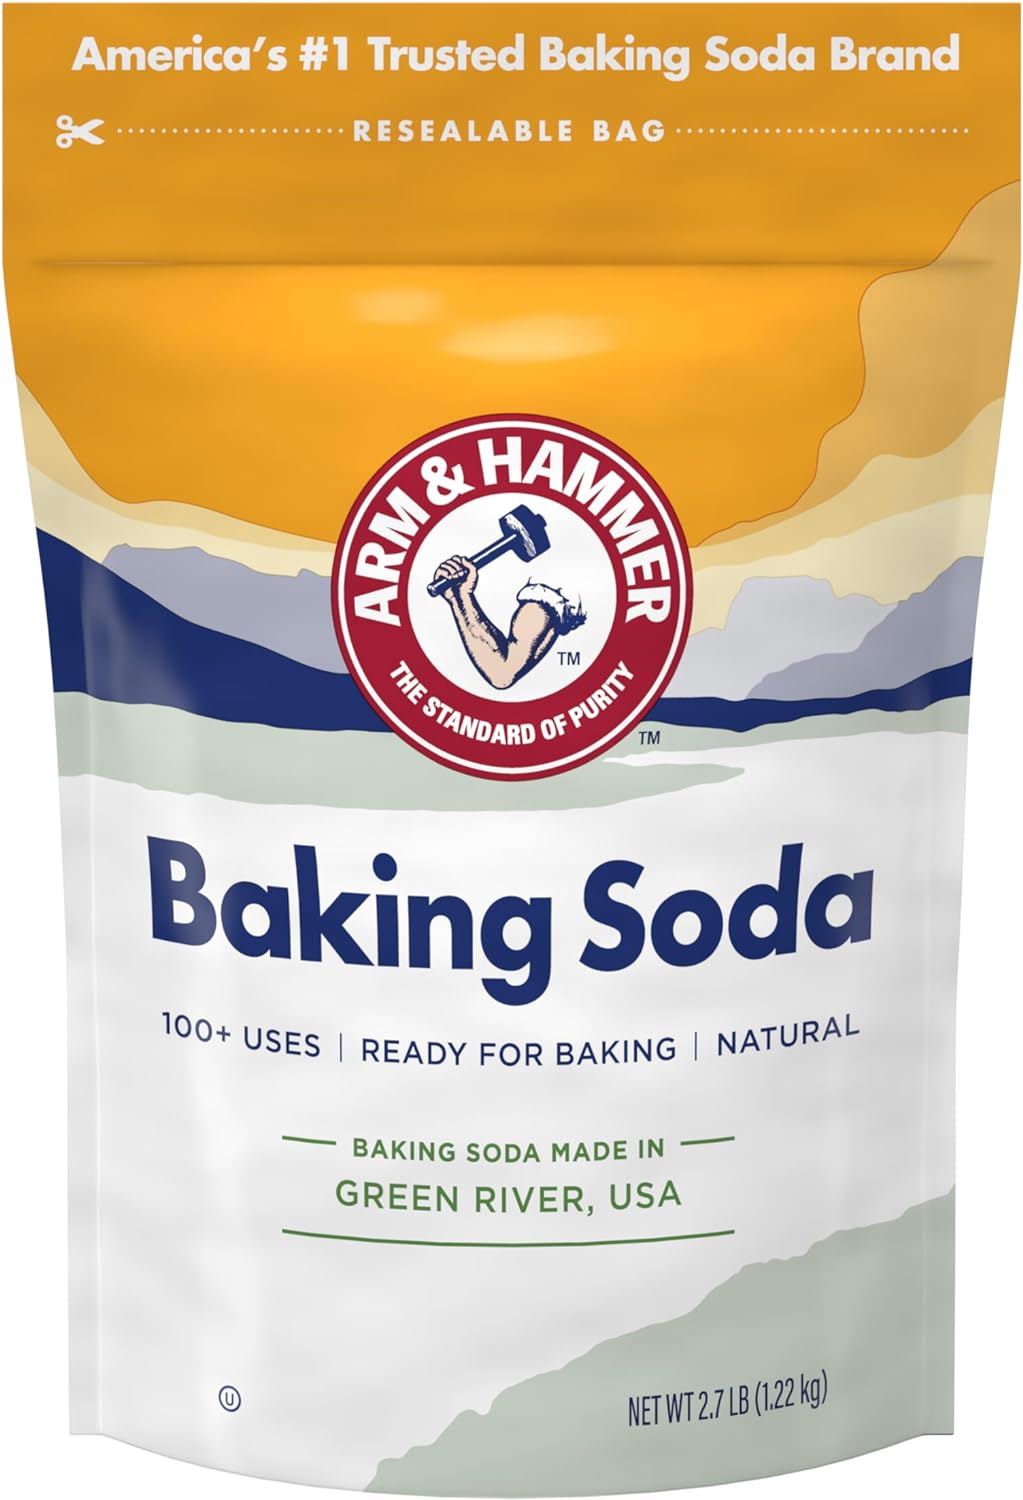 Uniites™ ARM & HAMMER Baking Soda Made in USA, Ideal for Baking, Pure & Natural, 2.7lb Bag $7.91